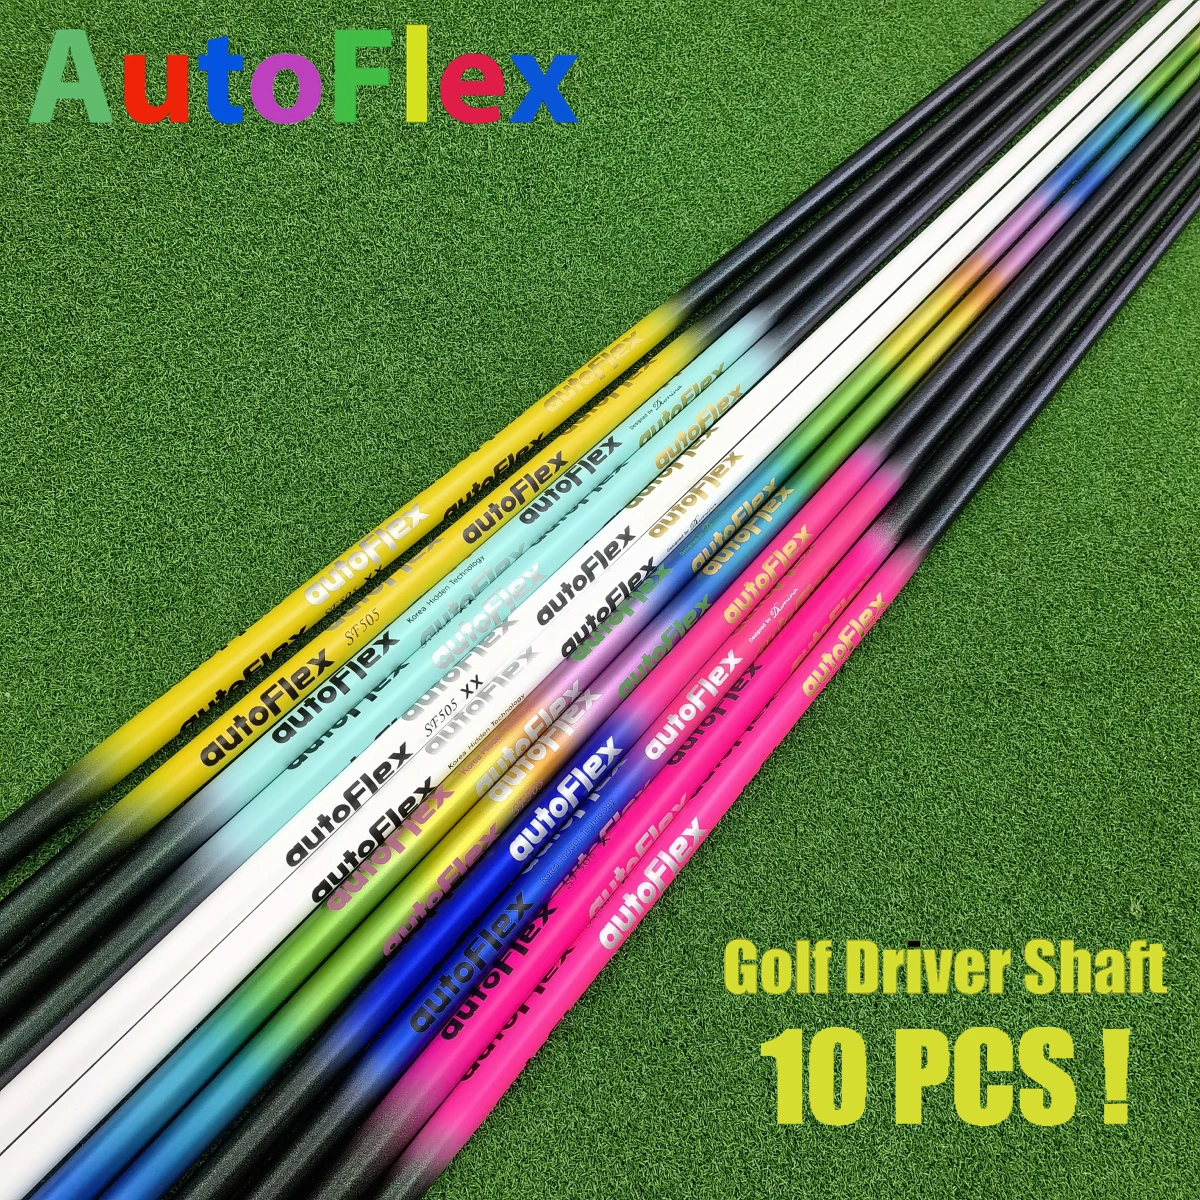 

Wholesale of 10 pcs Autoflex Drivers Shaft Multi-Color Golf Club Shaft SF505/SF505X/SF505XX Graphite Can be Mixed and Matched